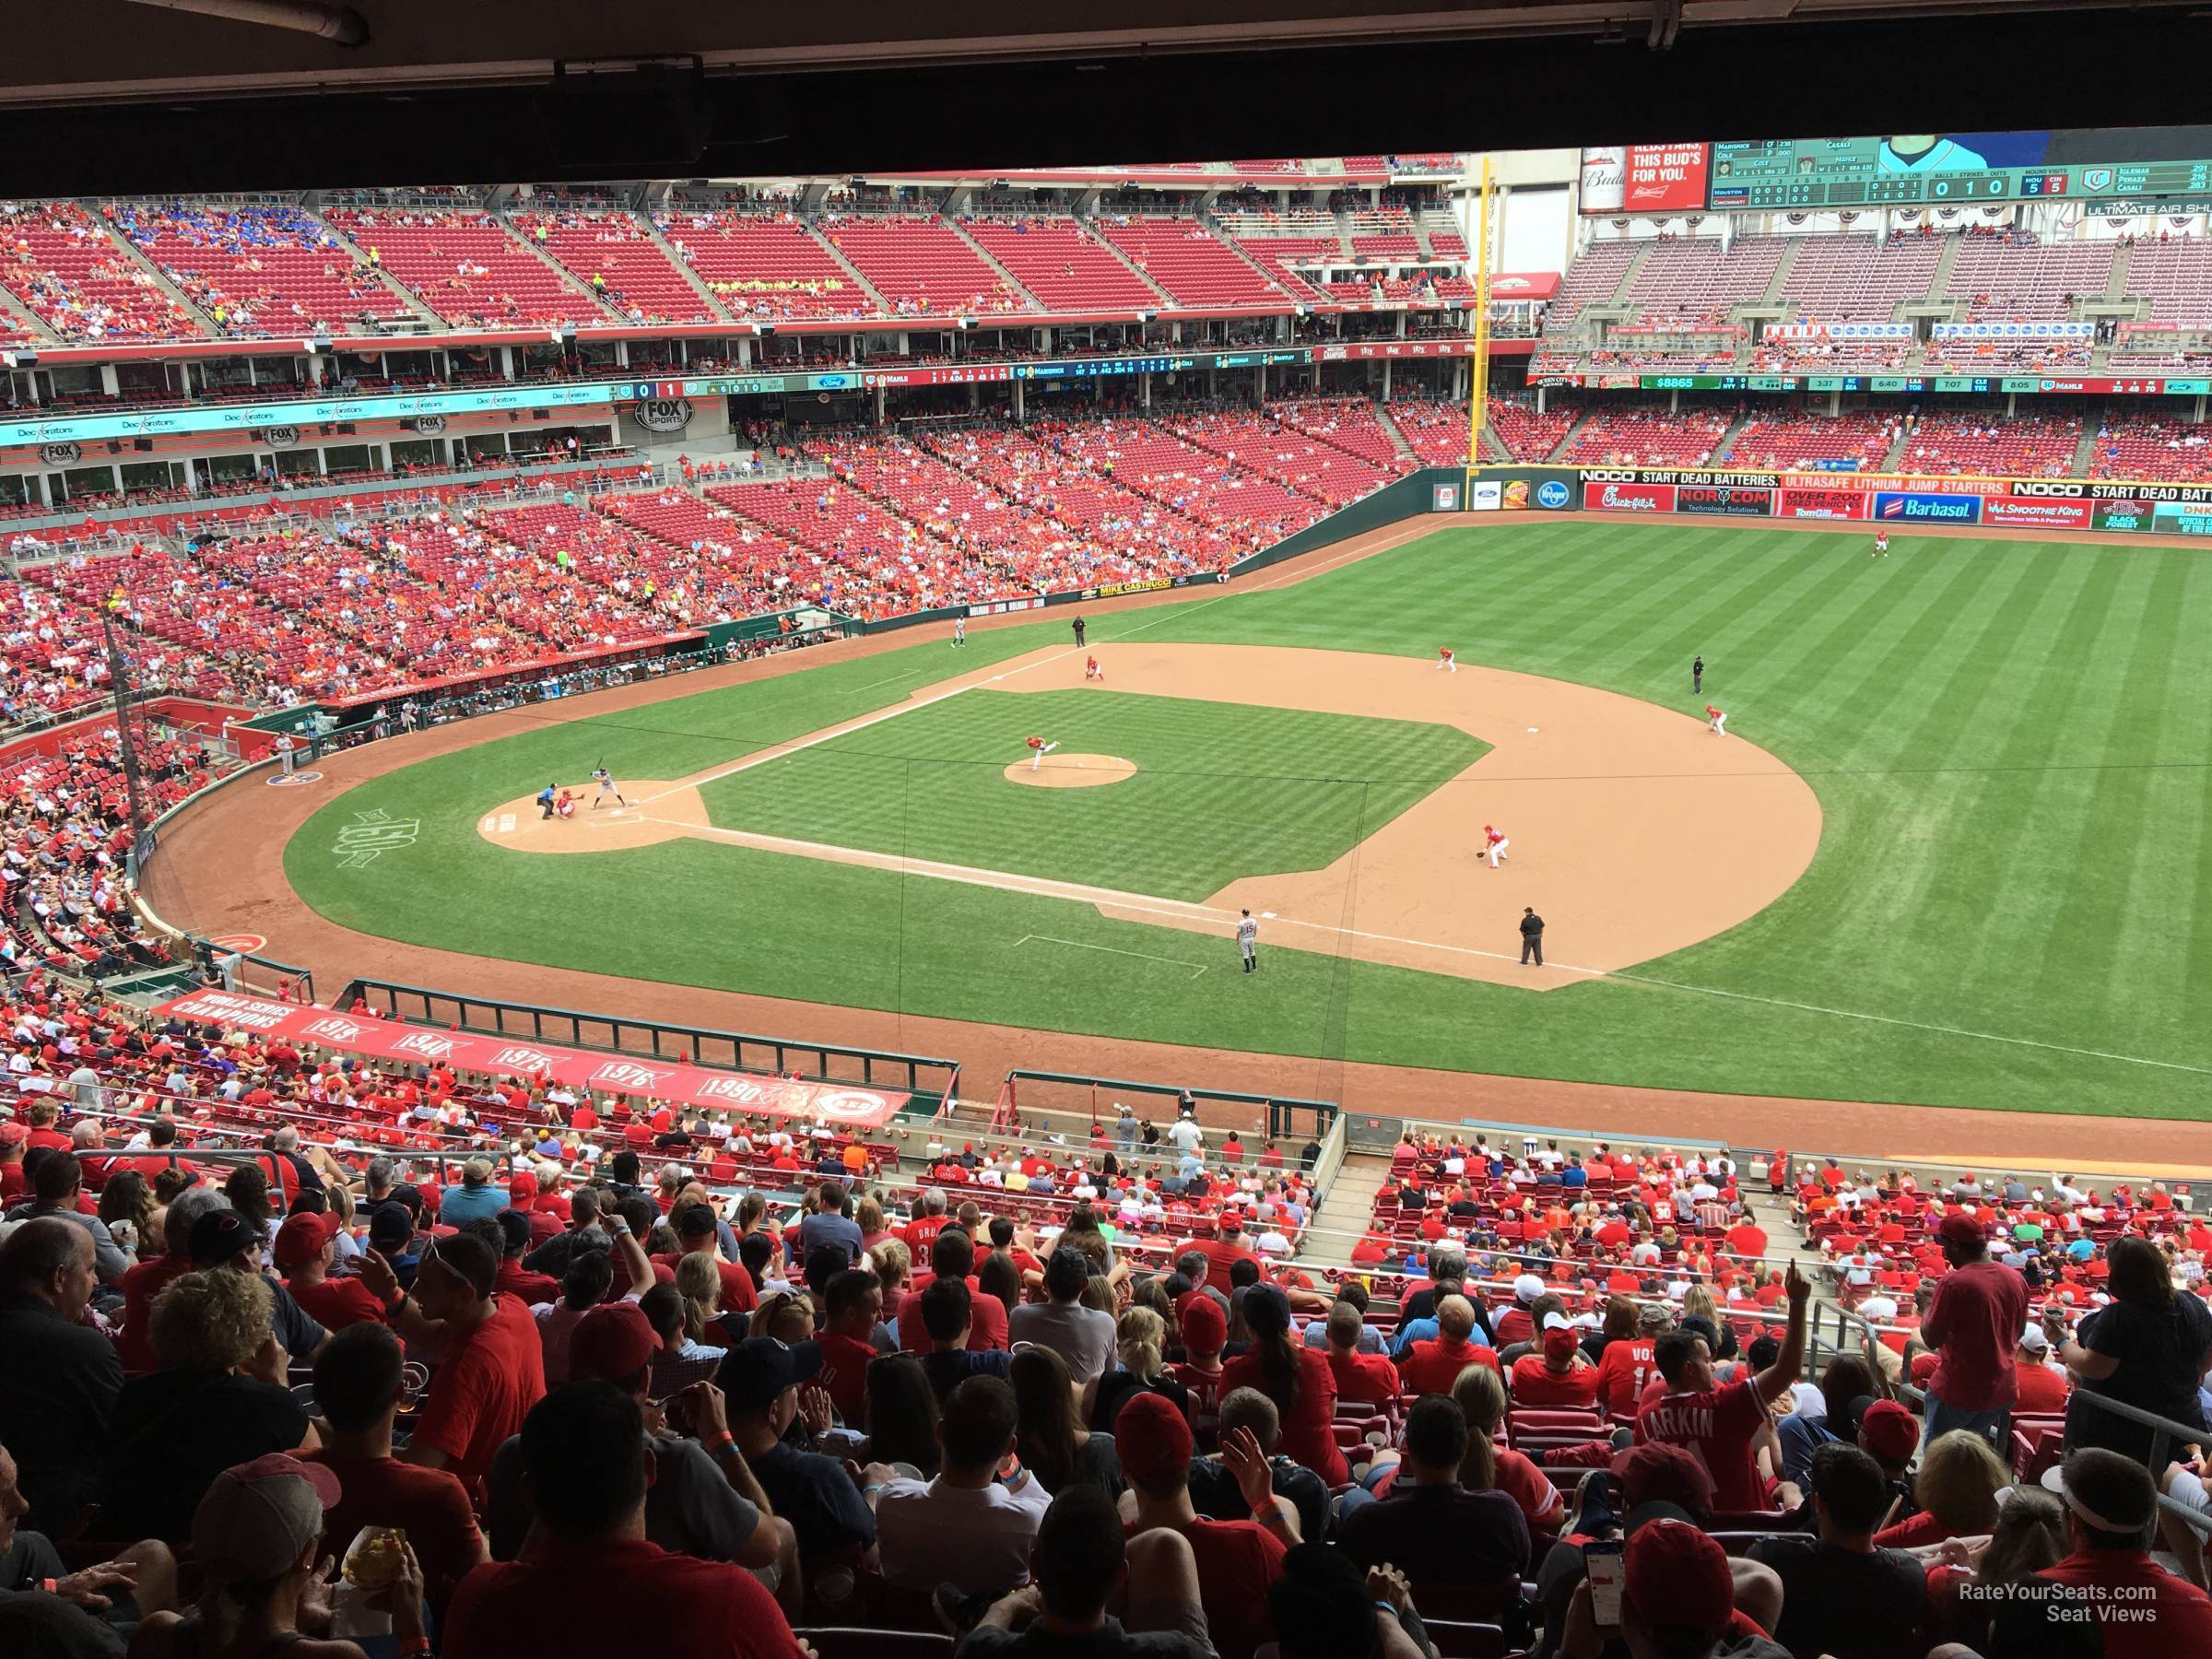 Breakdown Of The Great American Ball Park Seating Chart